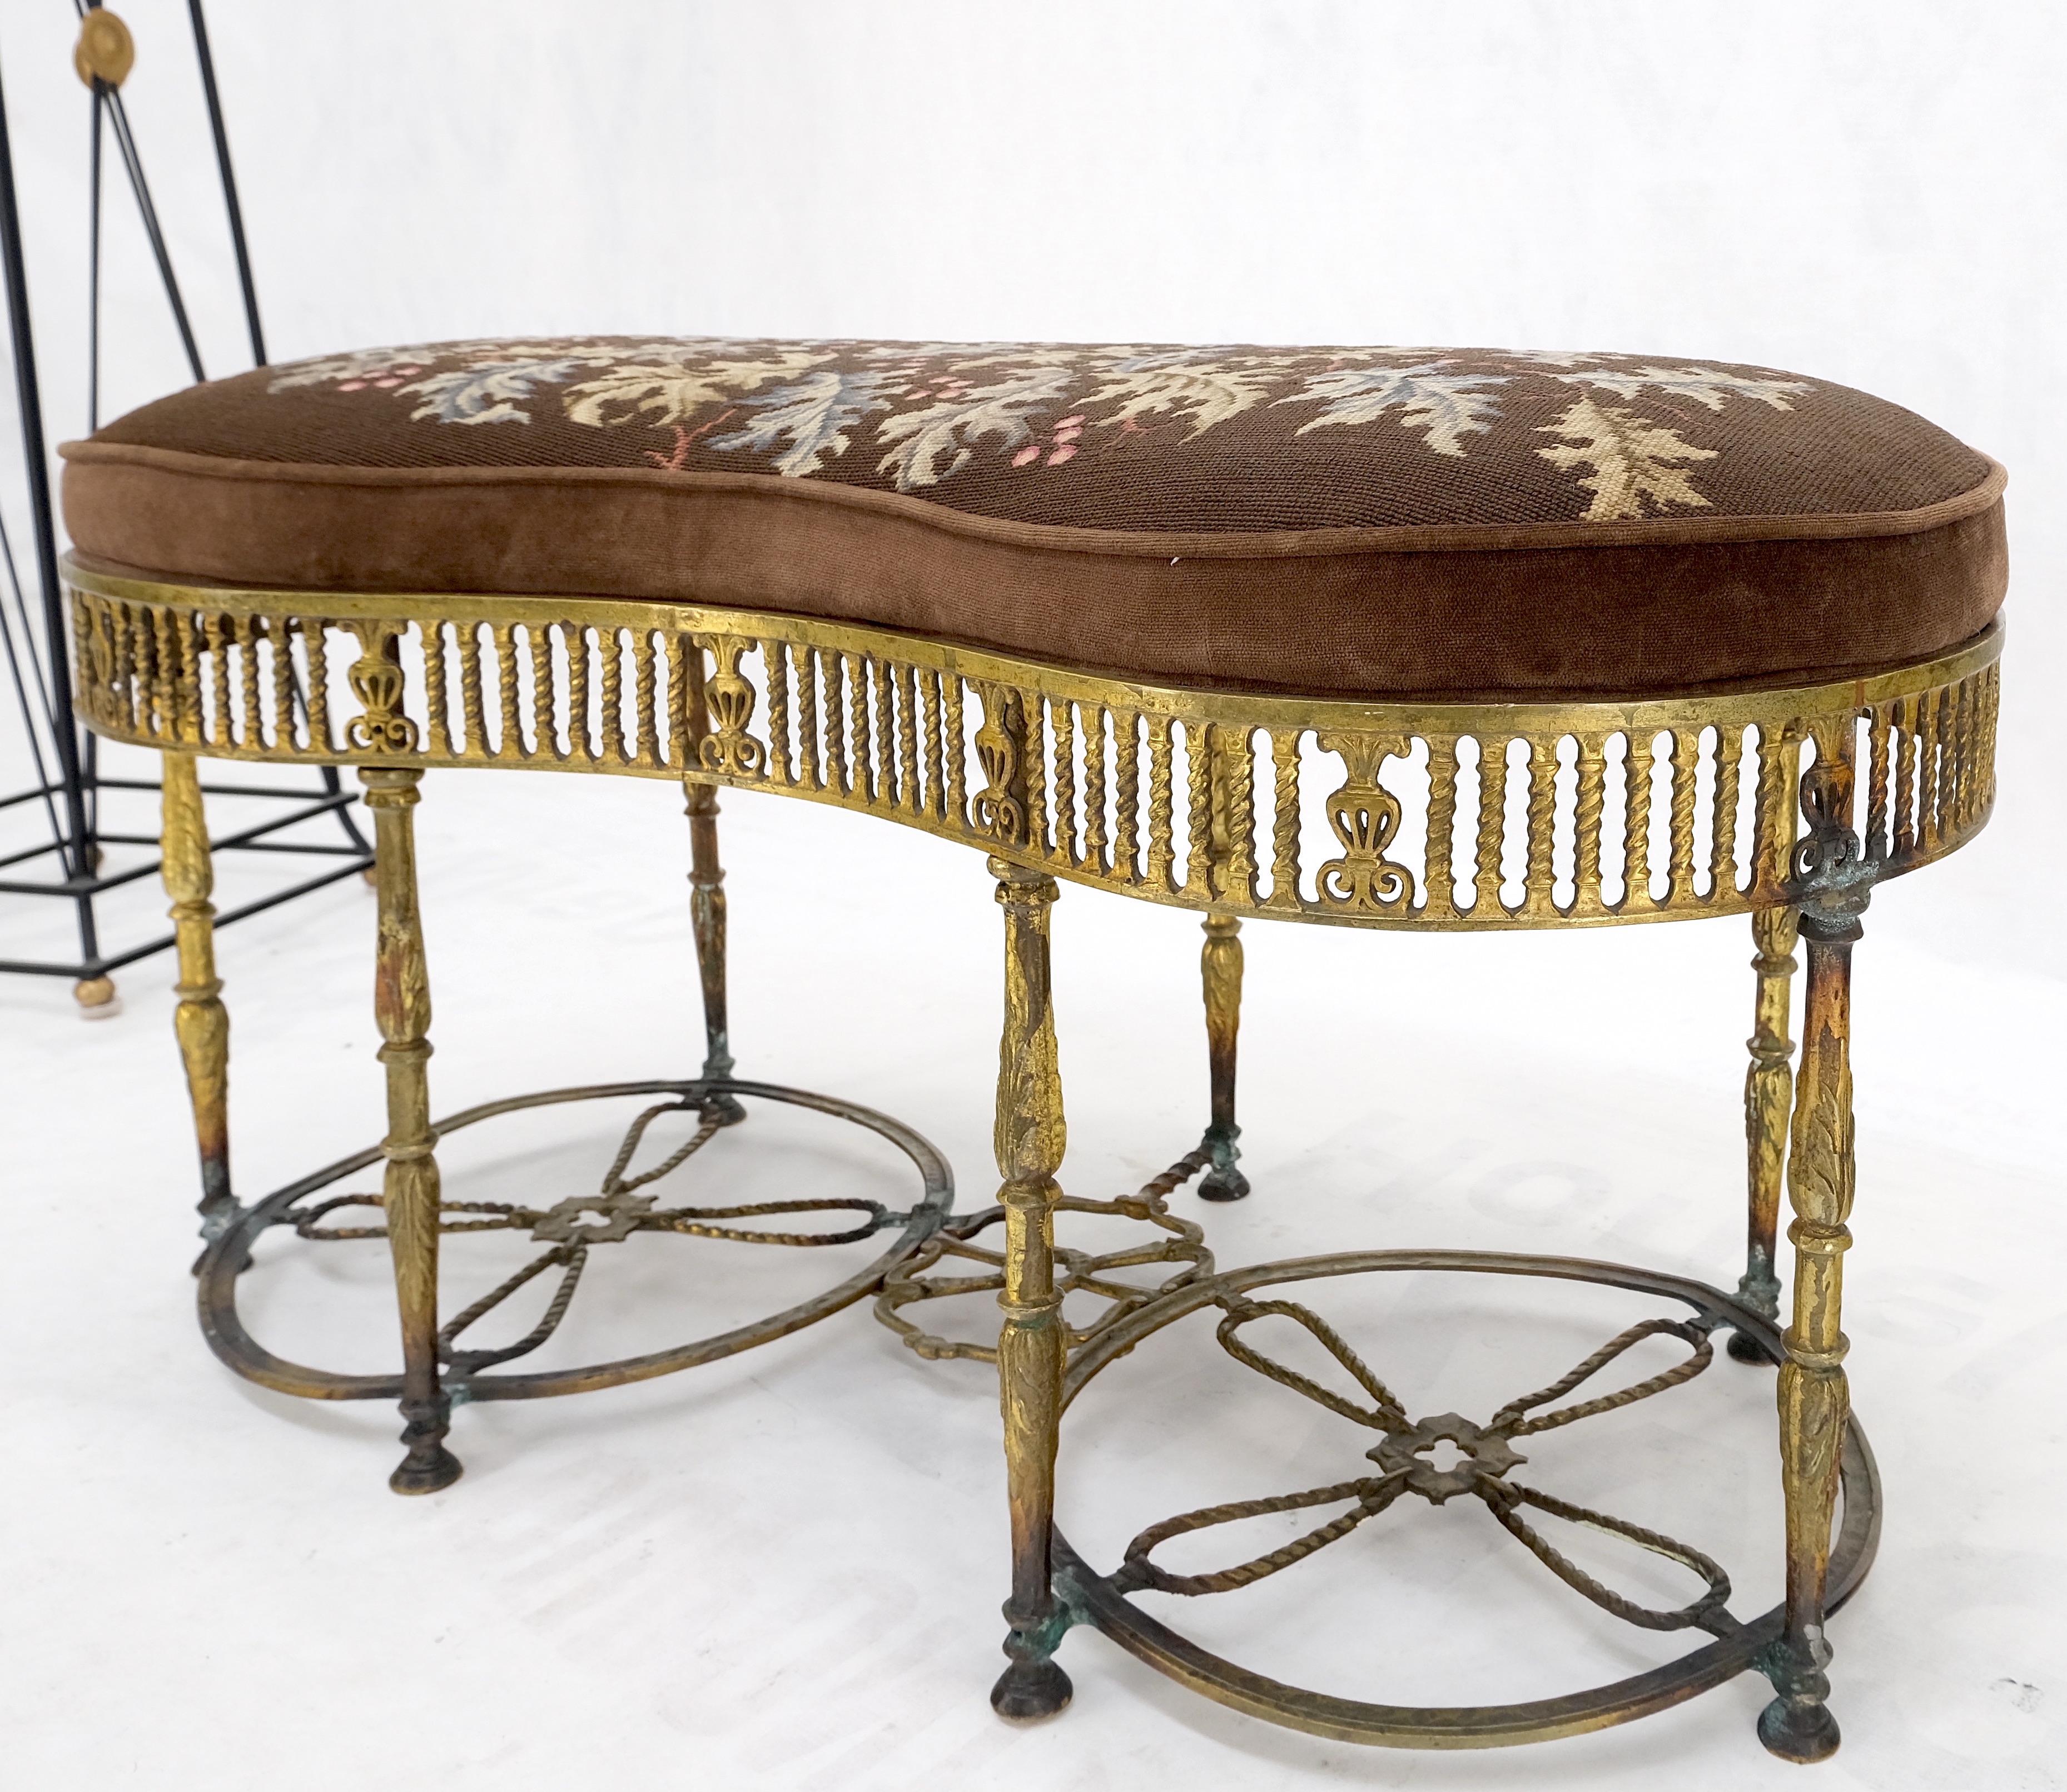 Brass Antique Heavy Solid Bronze Kidney Shape Bench W/ Needle Point Upholstery Seat For Sale